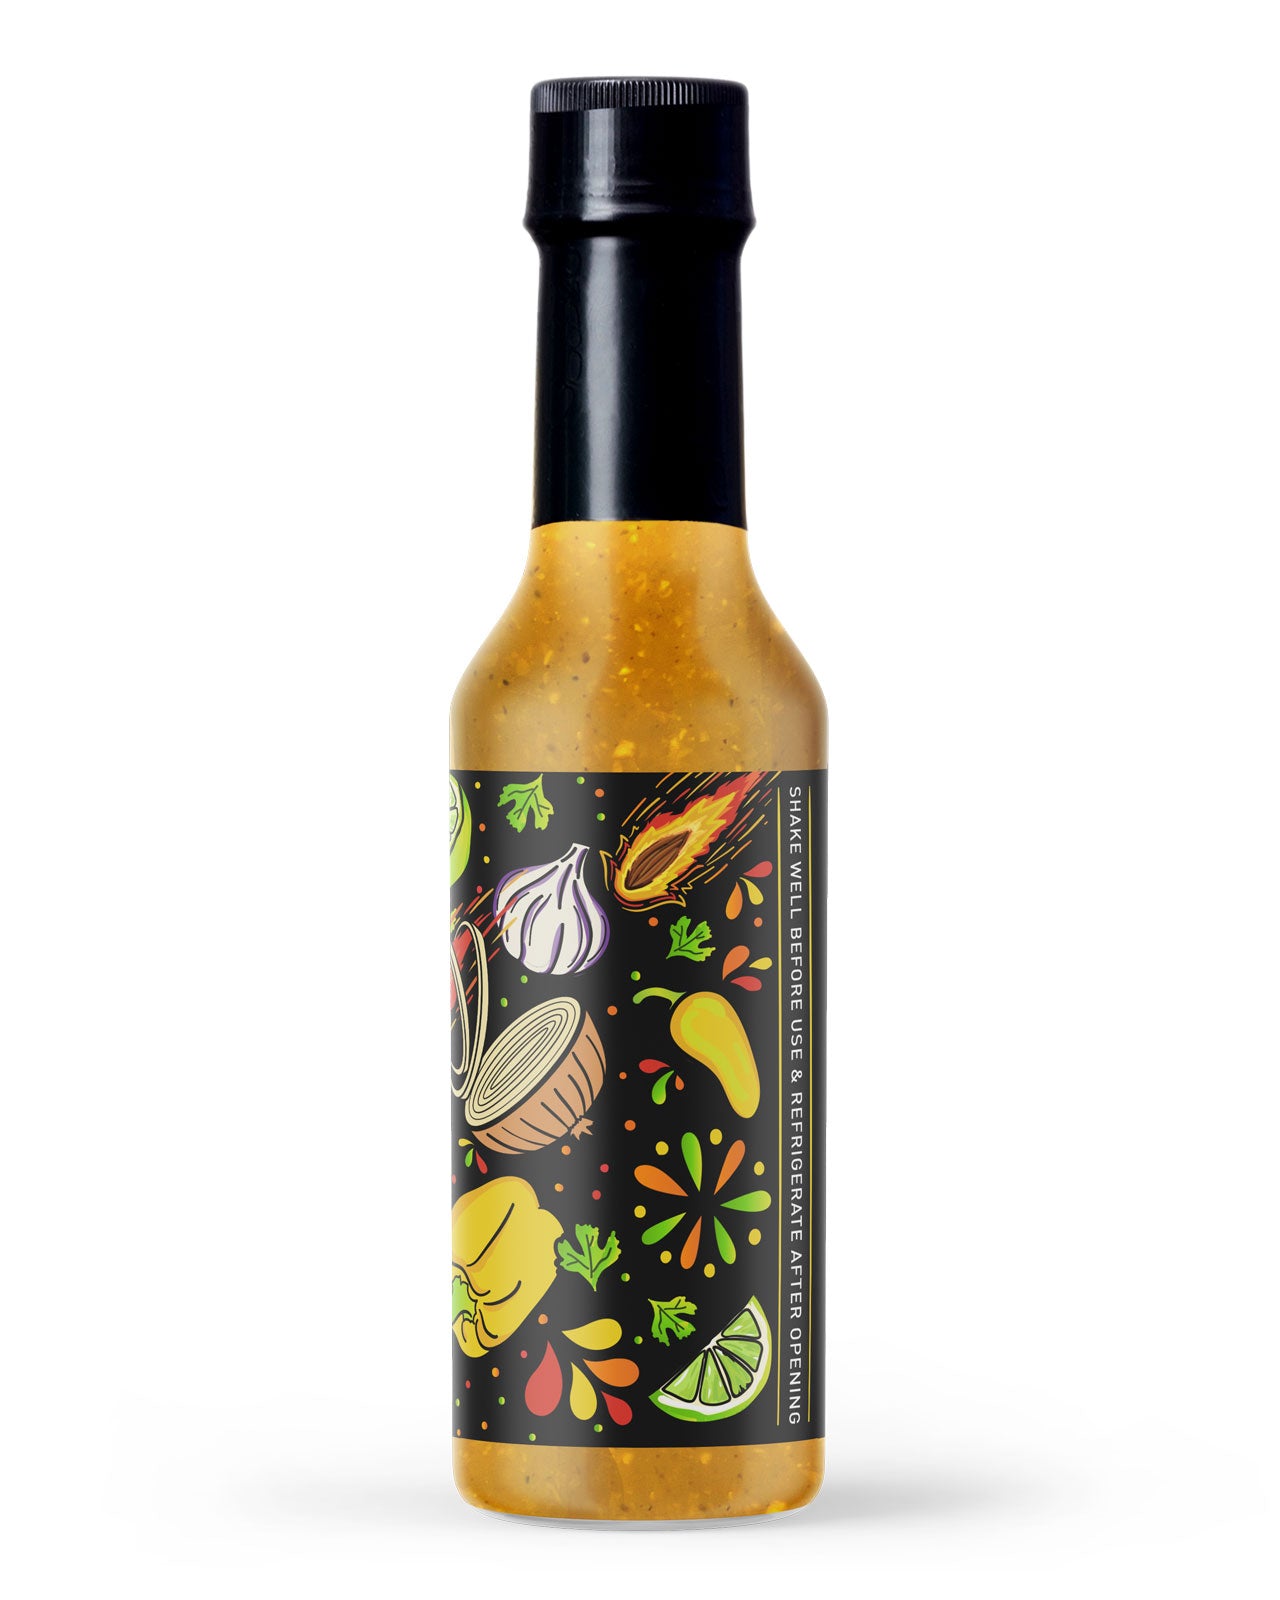 The Taco Topper Hot Sauce (Mild 3/10)